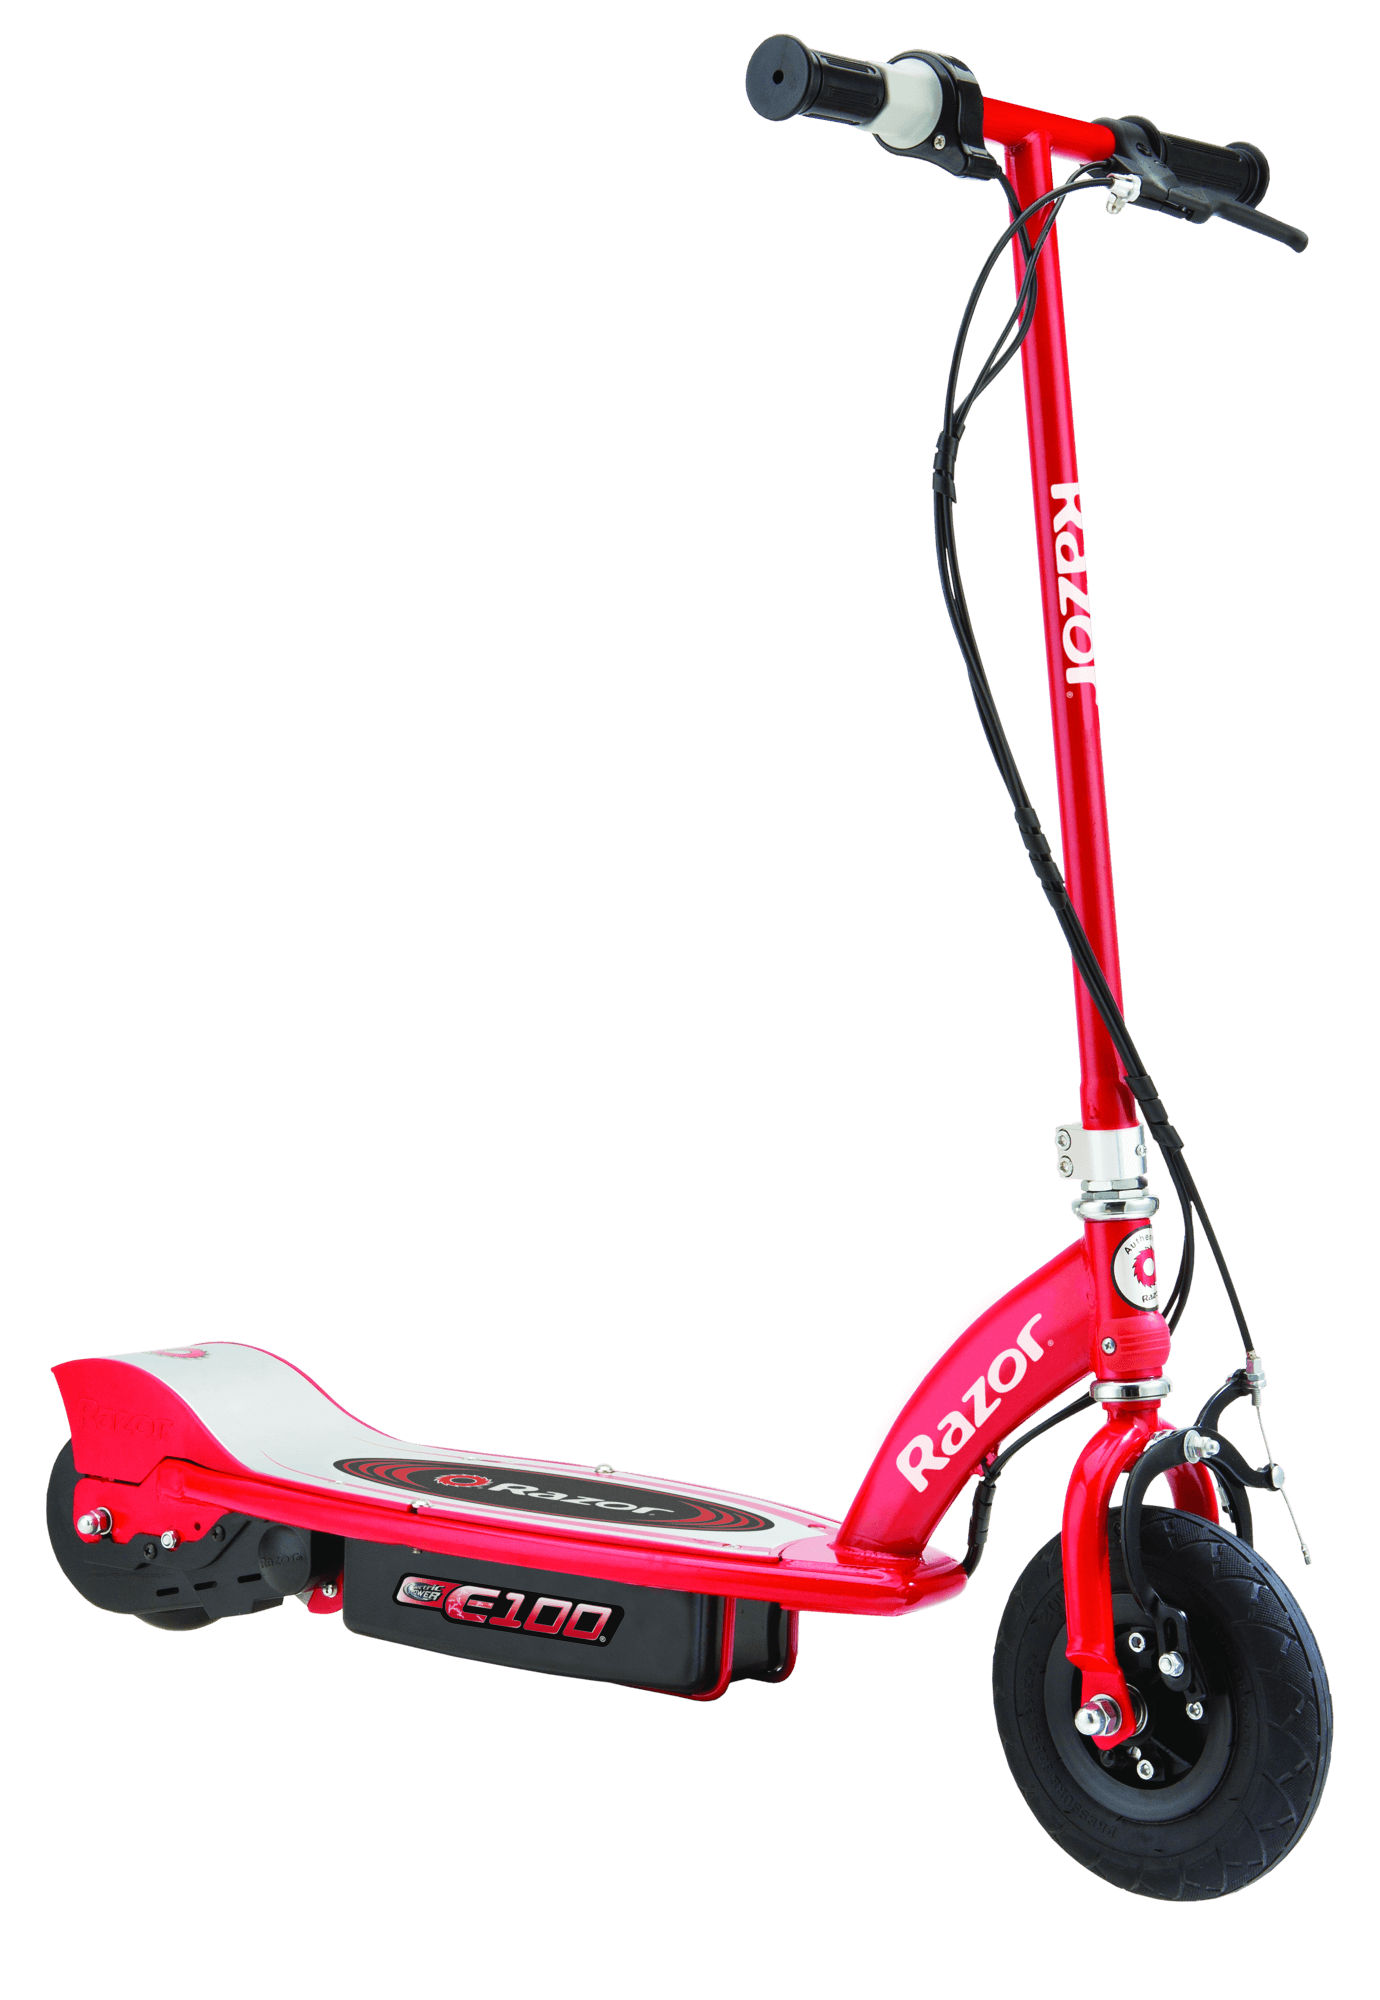 Razor Electric Scooter Red Razor E100 Electric Scooter - Glow